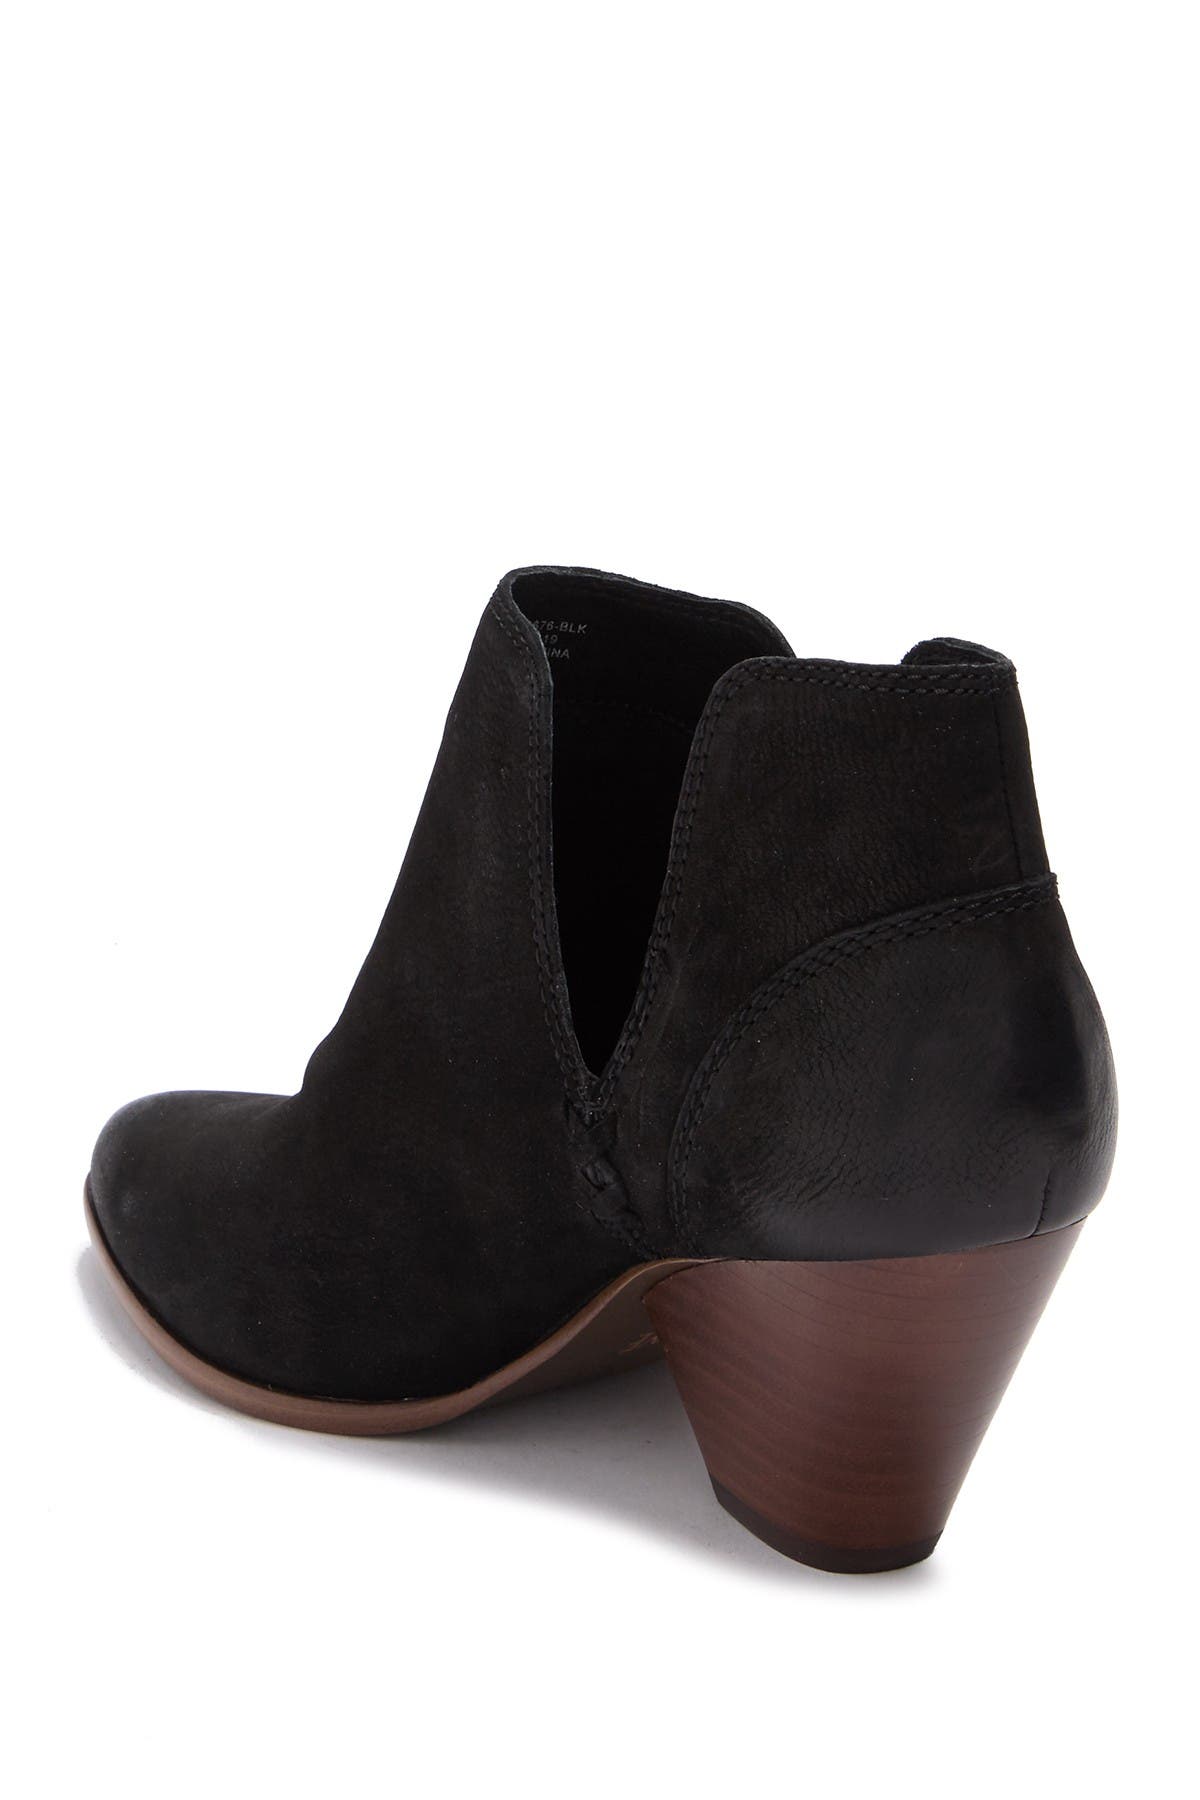 frye reina cut out bootie